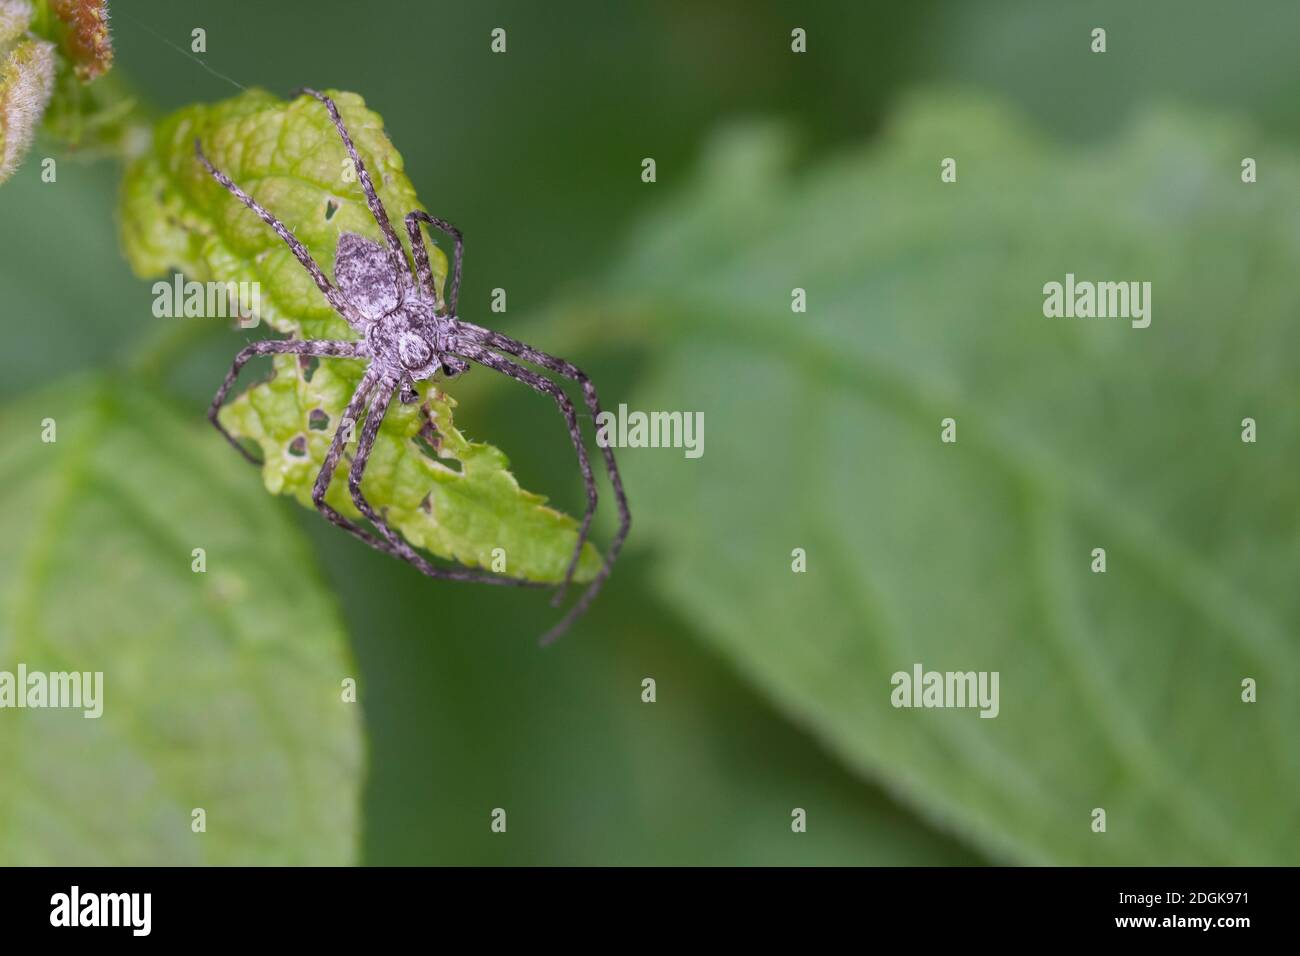 Crab Spider High Resolution Stock Photography and Images - Alamy